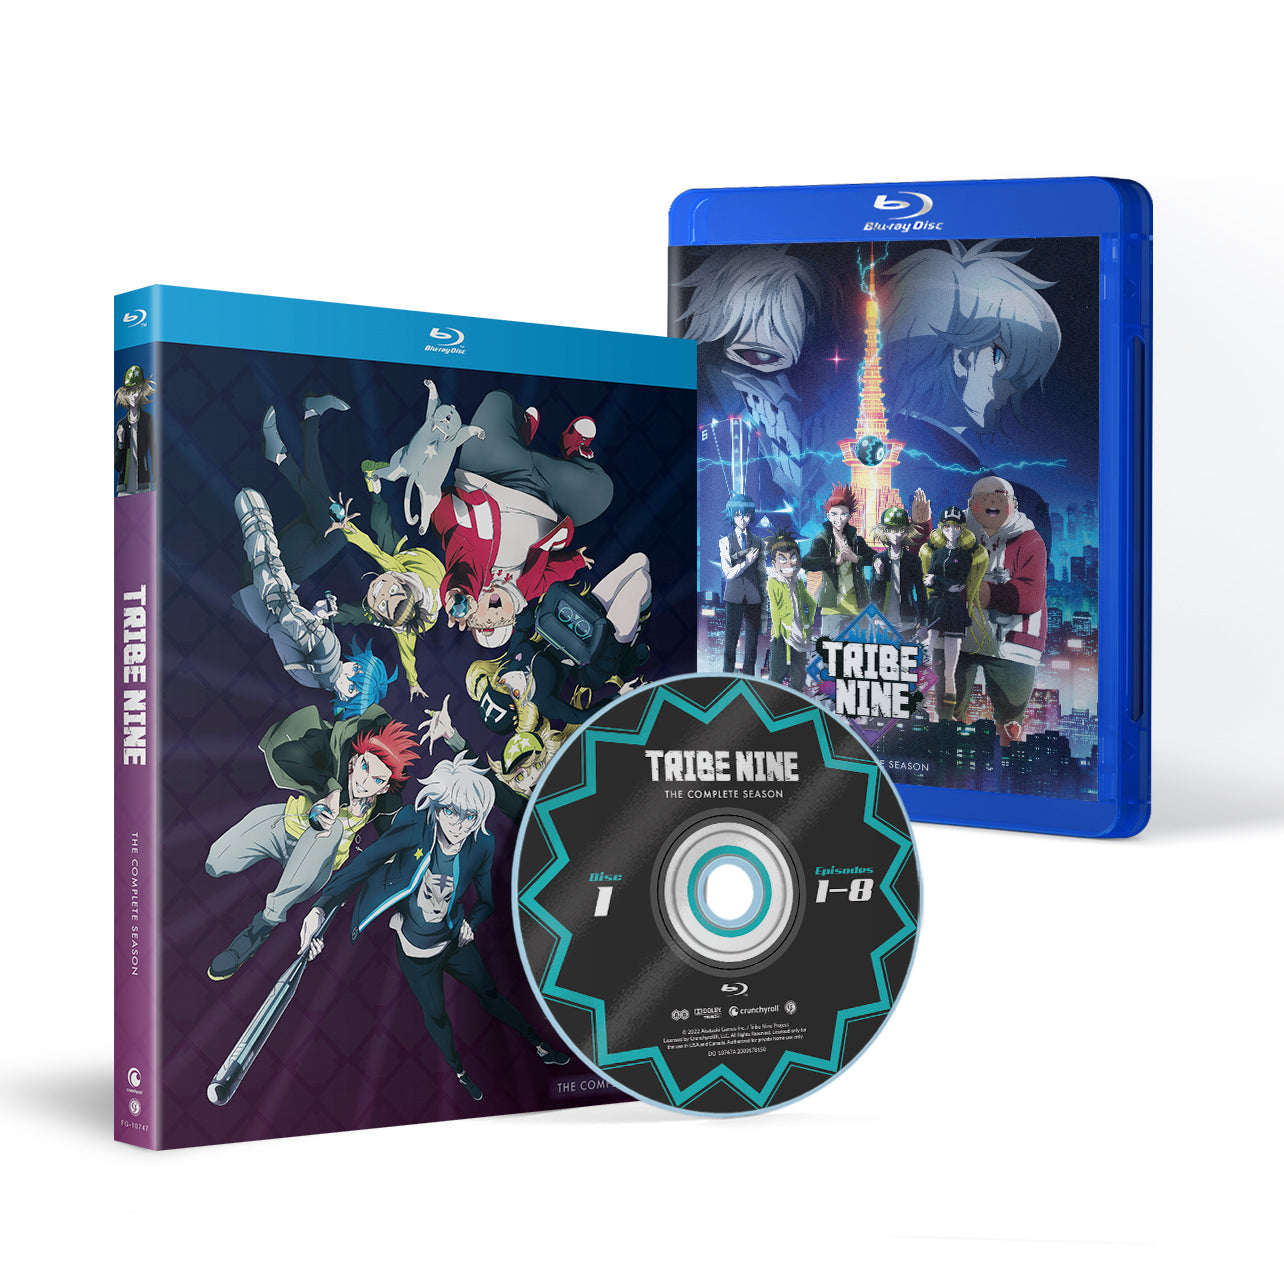 Tribe Nine - The Complete Season - Blu-ray image count 0